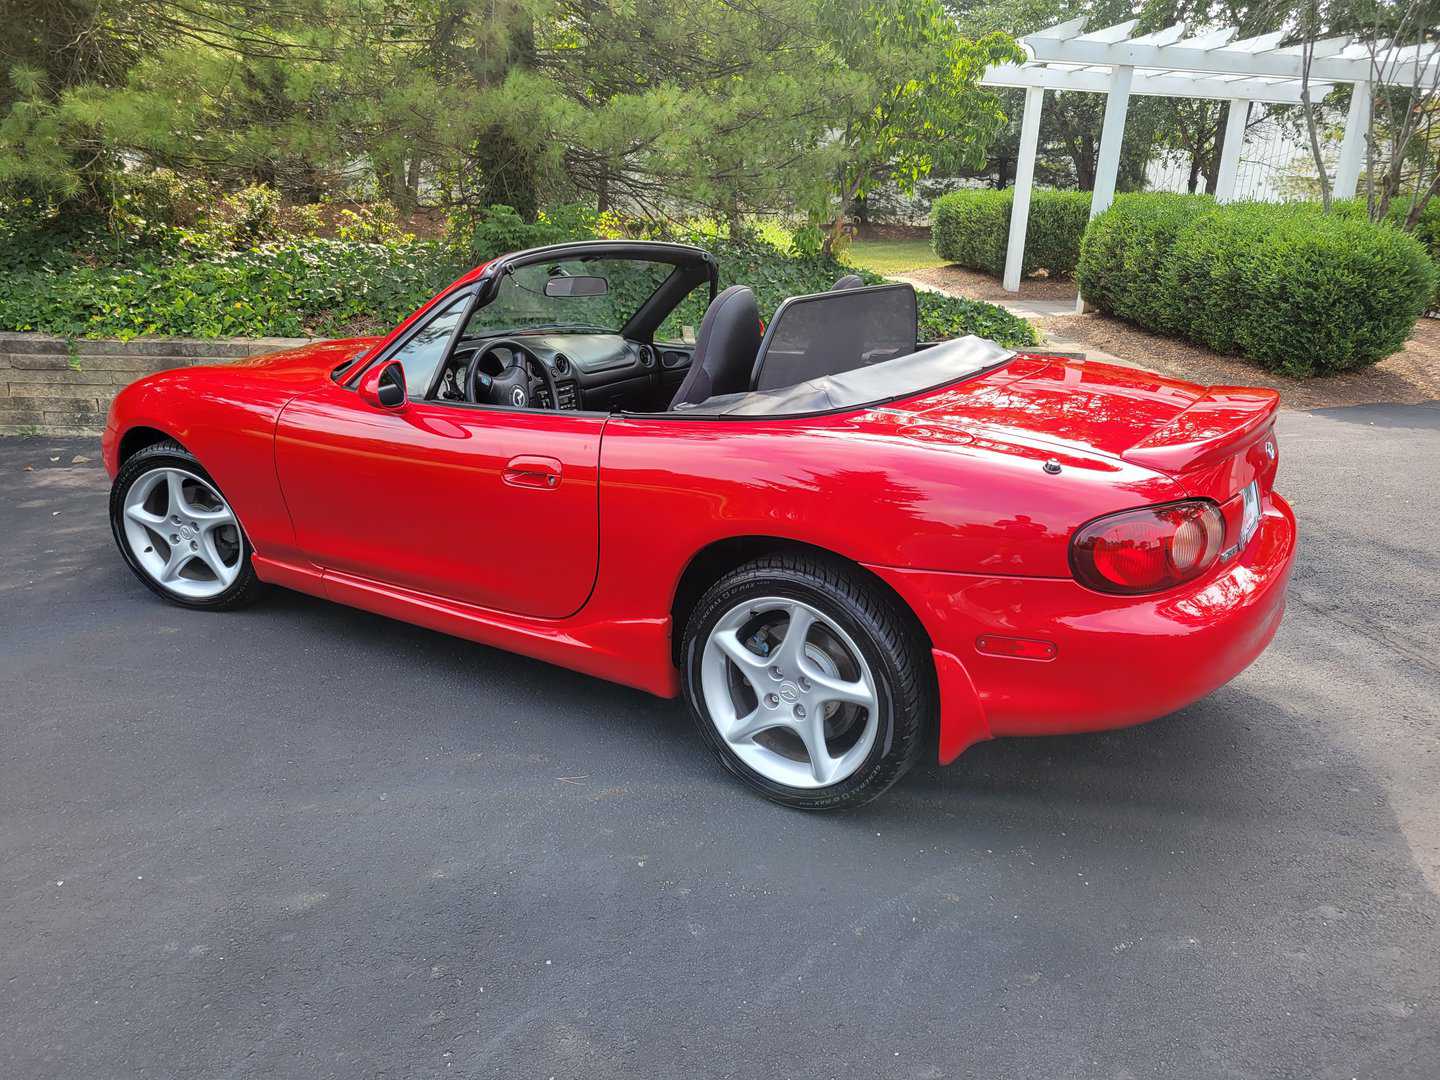 A red sports car is parked in a parking lot.